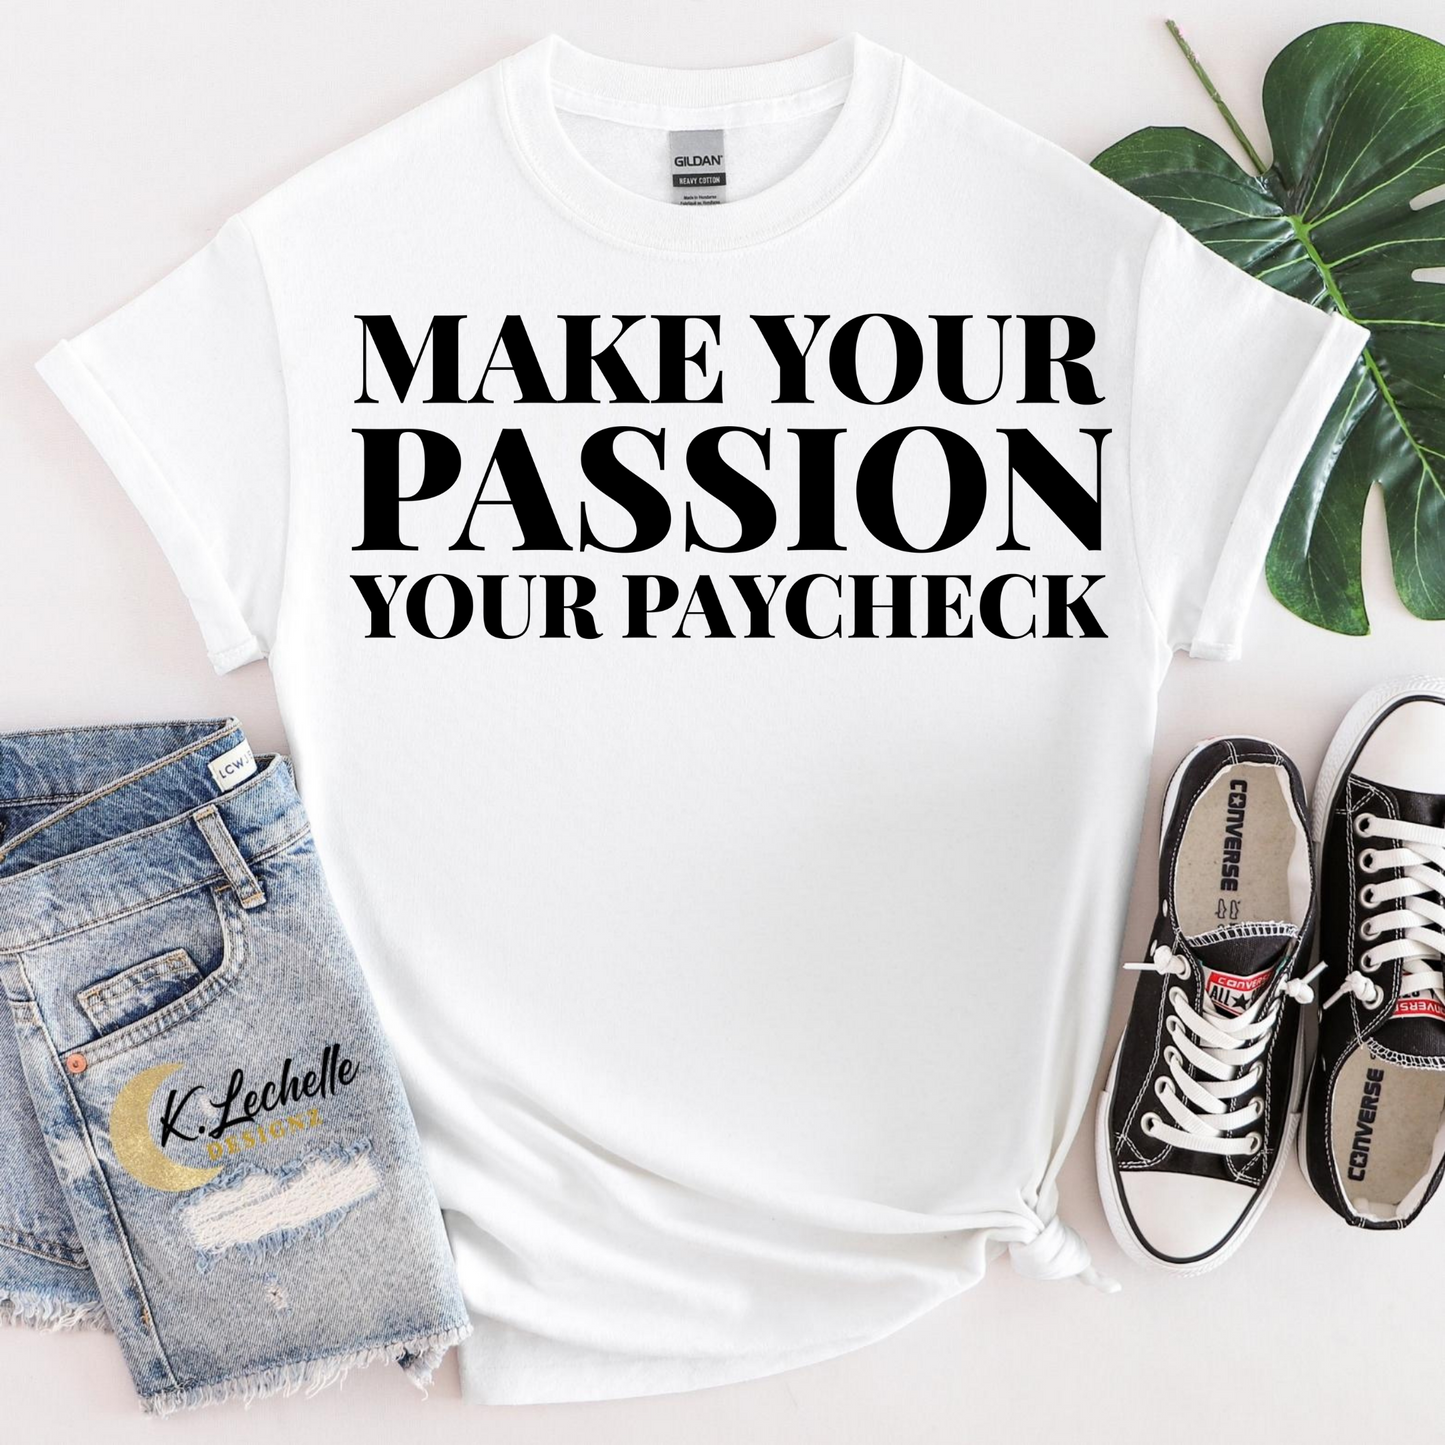 Make your passion your paycheck Shirt